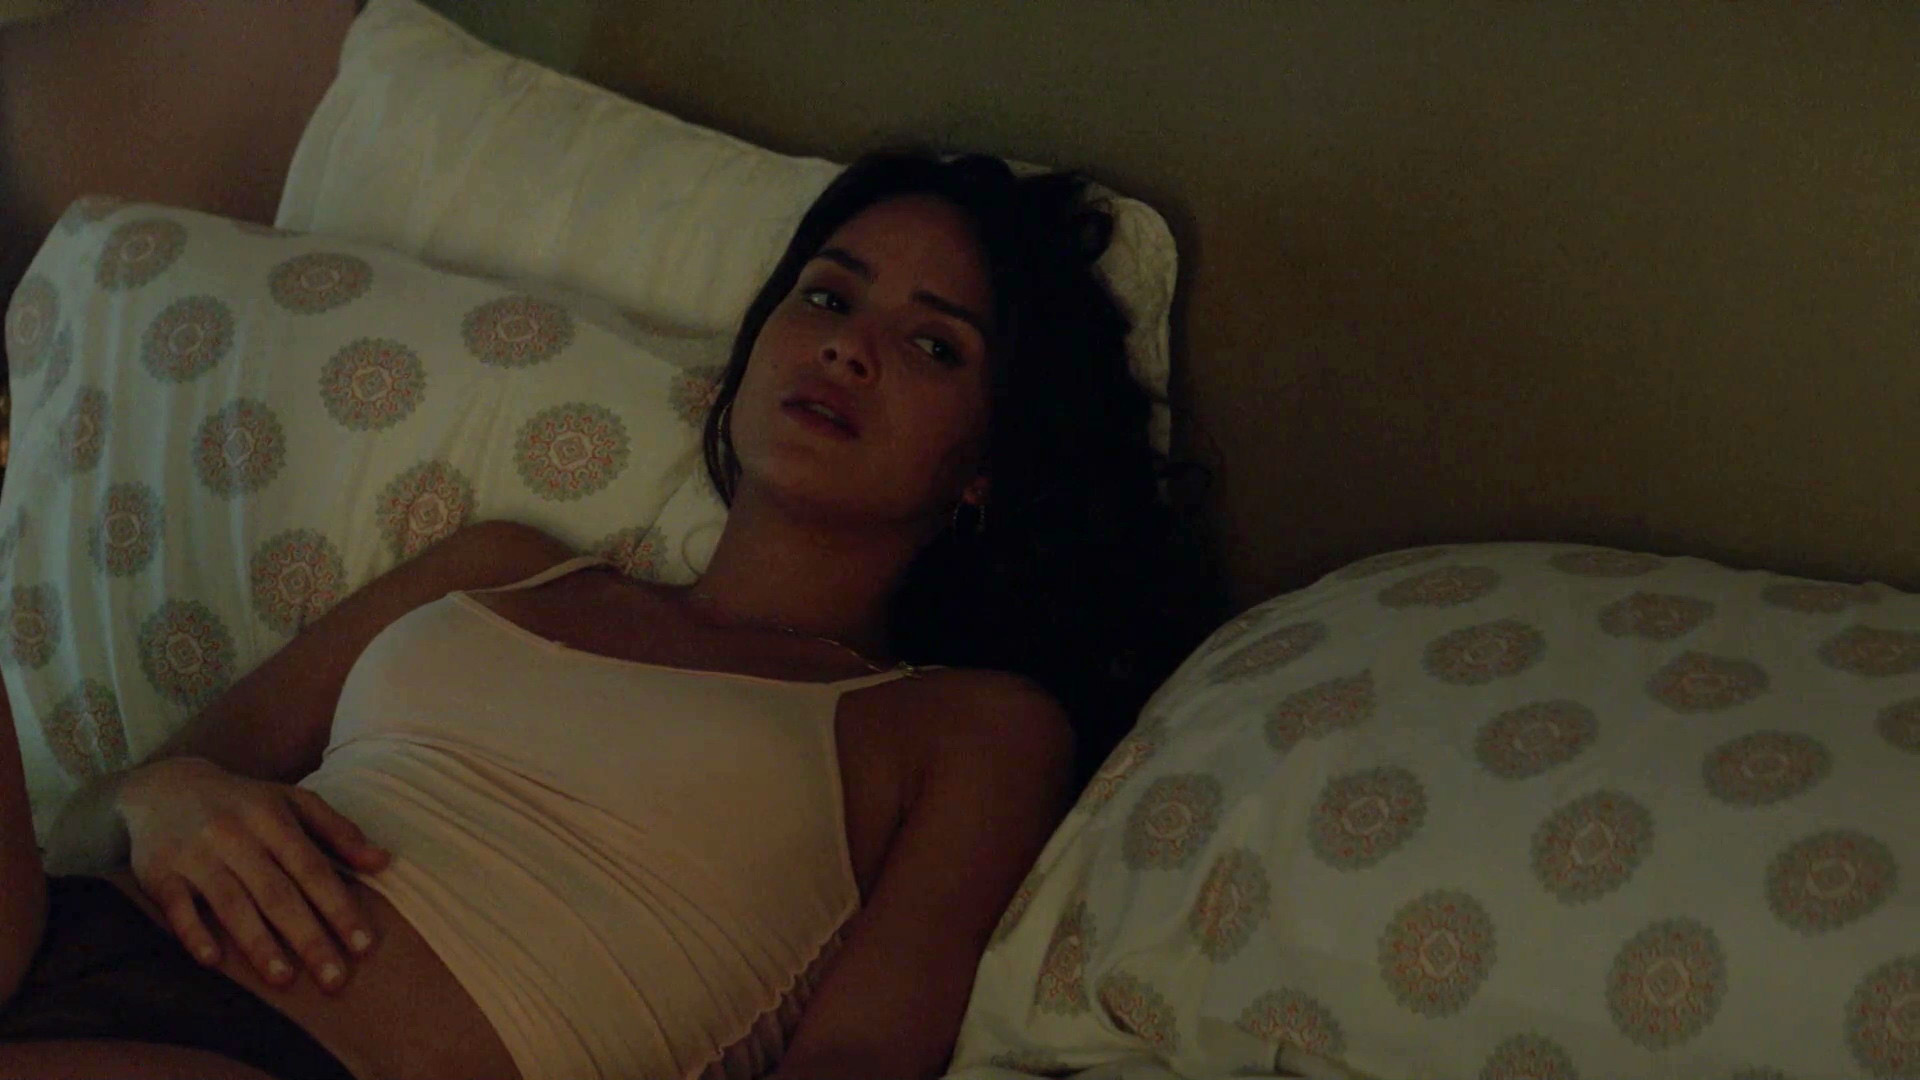 Naked Adria Arjona In True Detective Free Download Nude Photo Gallery.